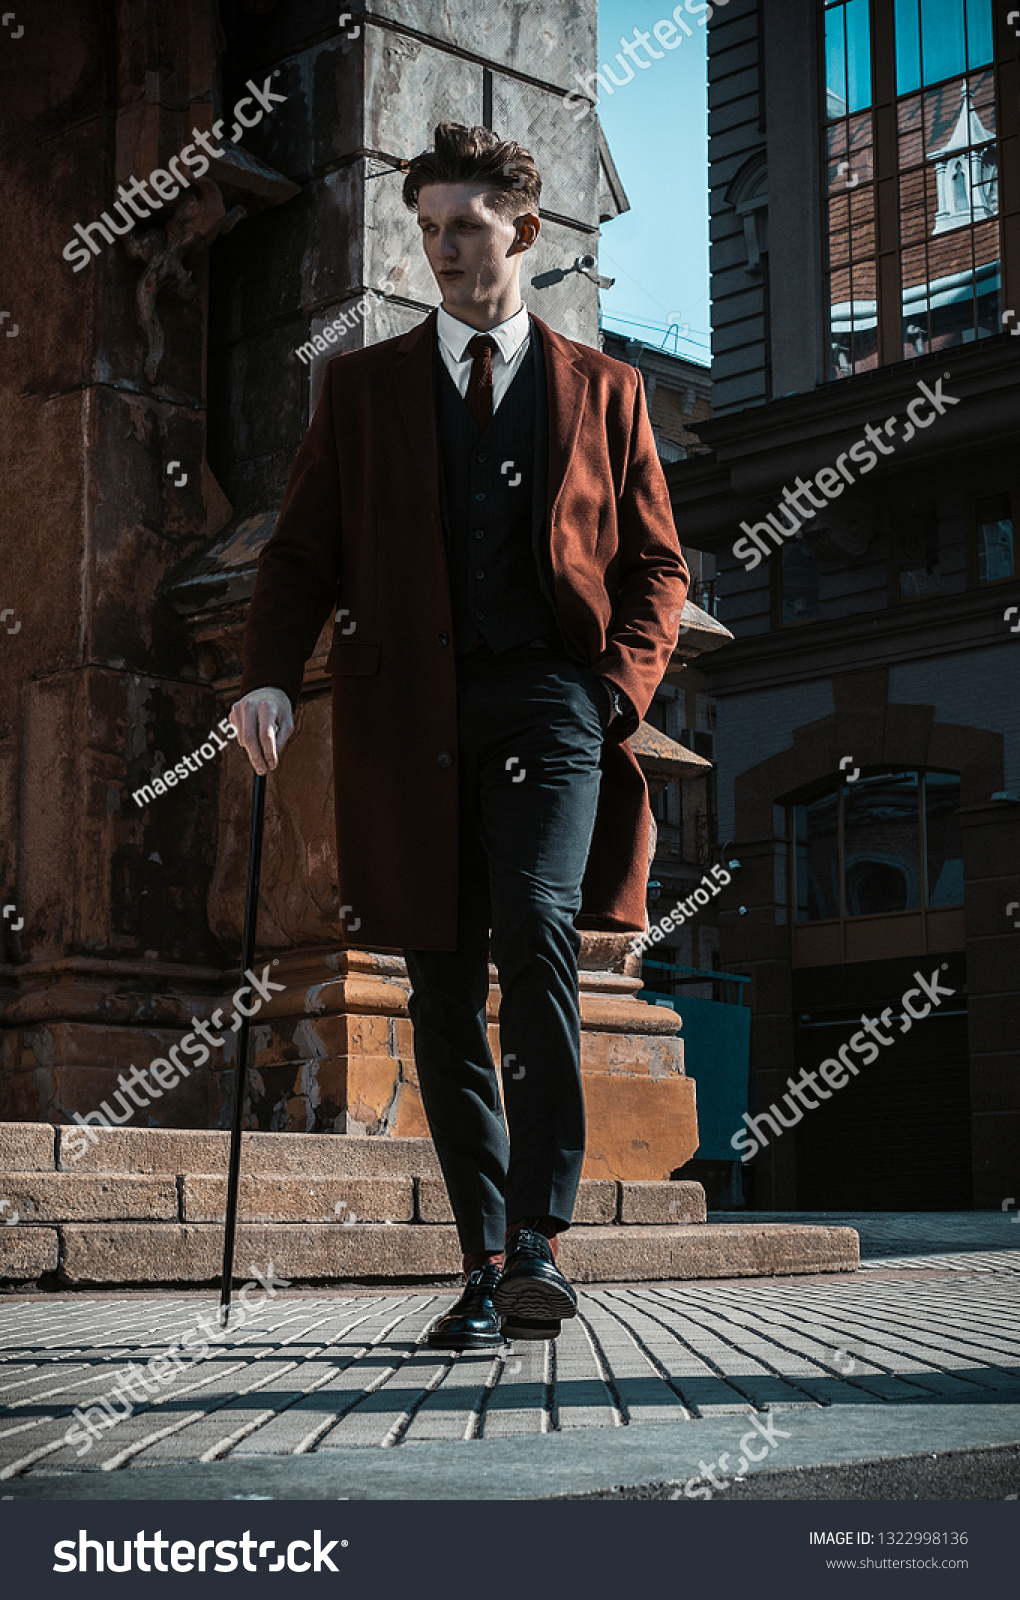 Fashion portrait of young man on red coat, white shirt, black suit and cane walking on streets of city background. Model shooting #1322998136